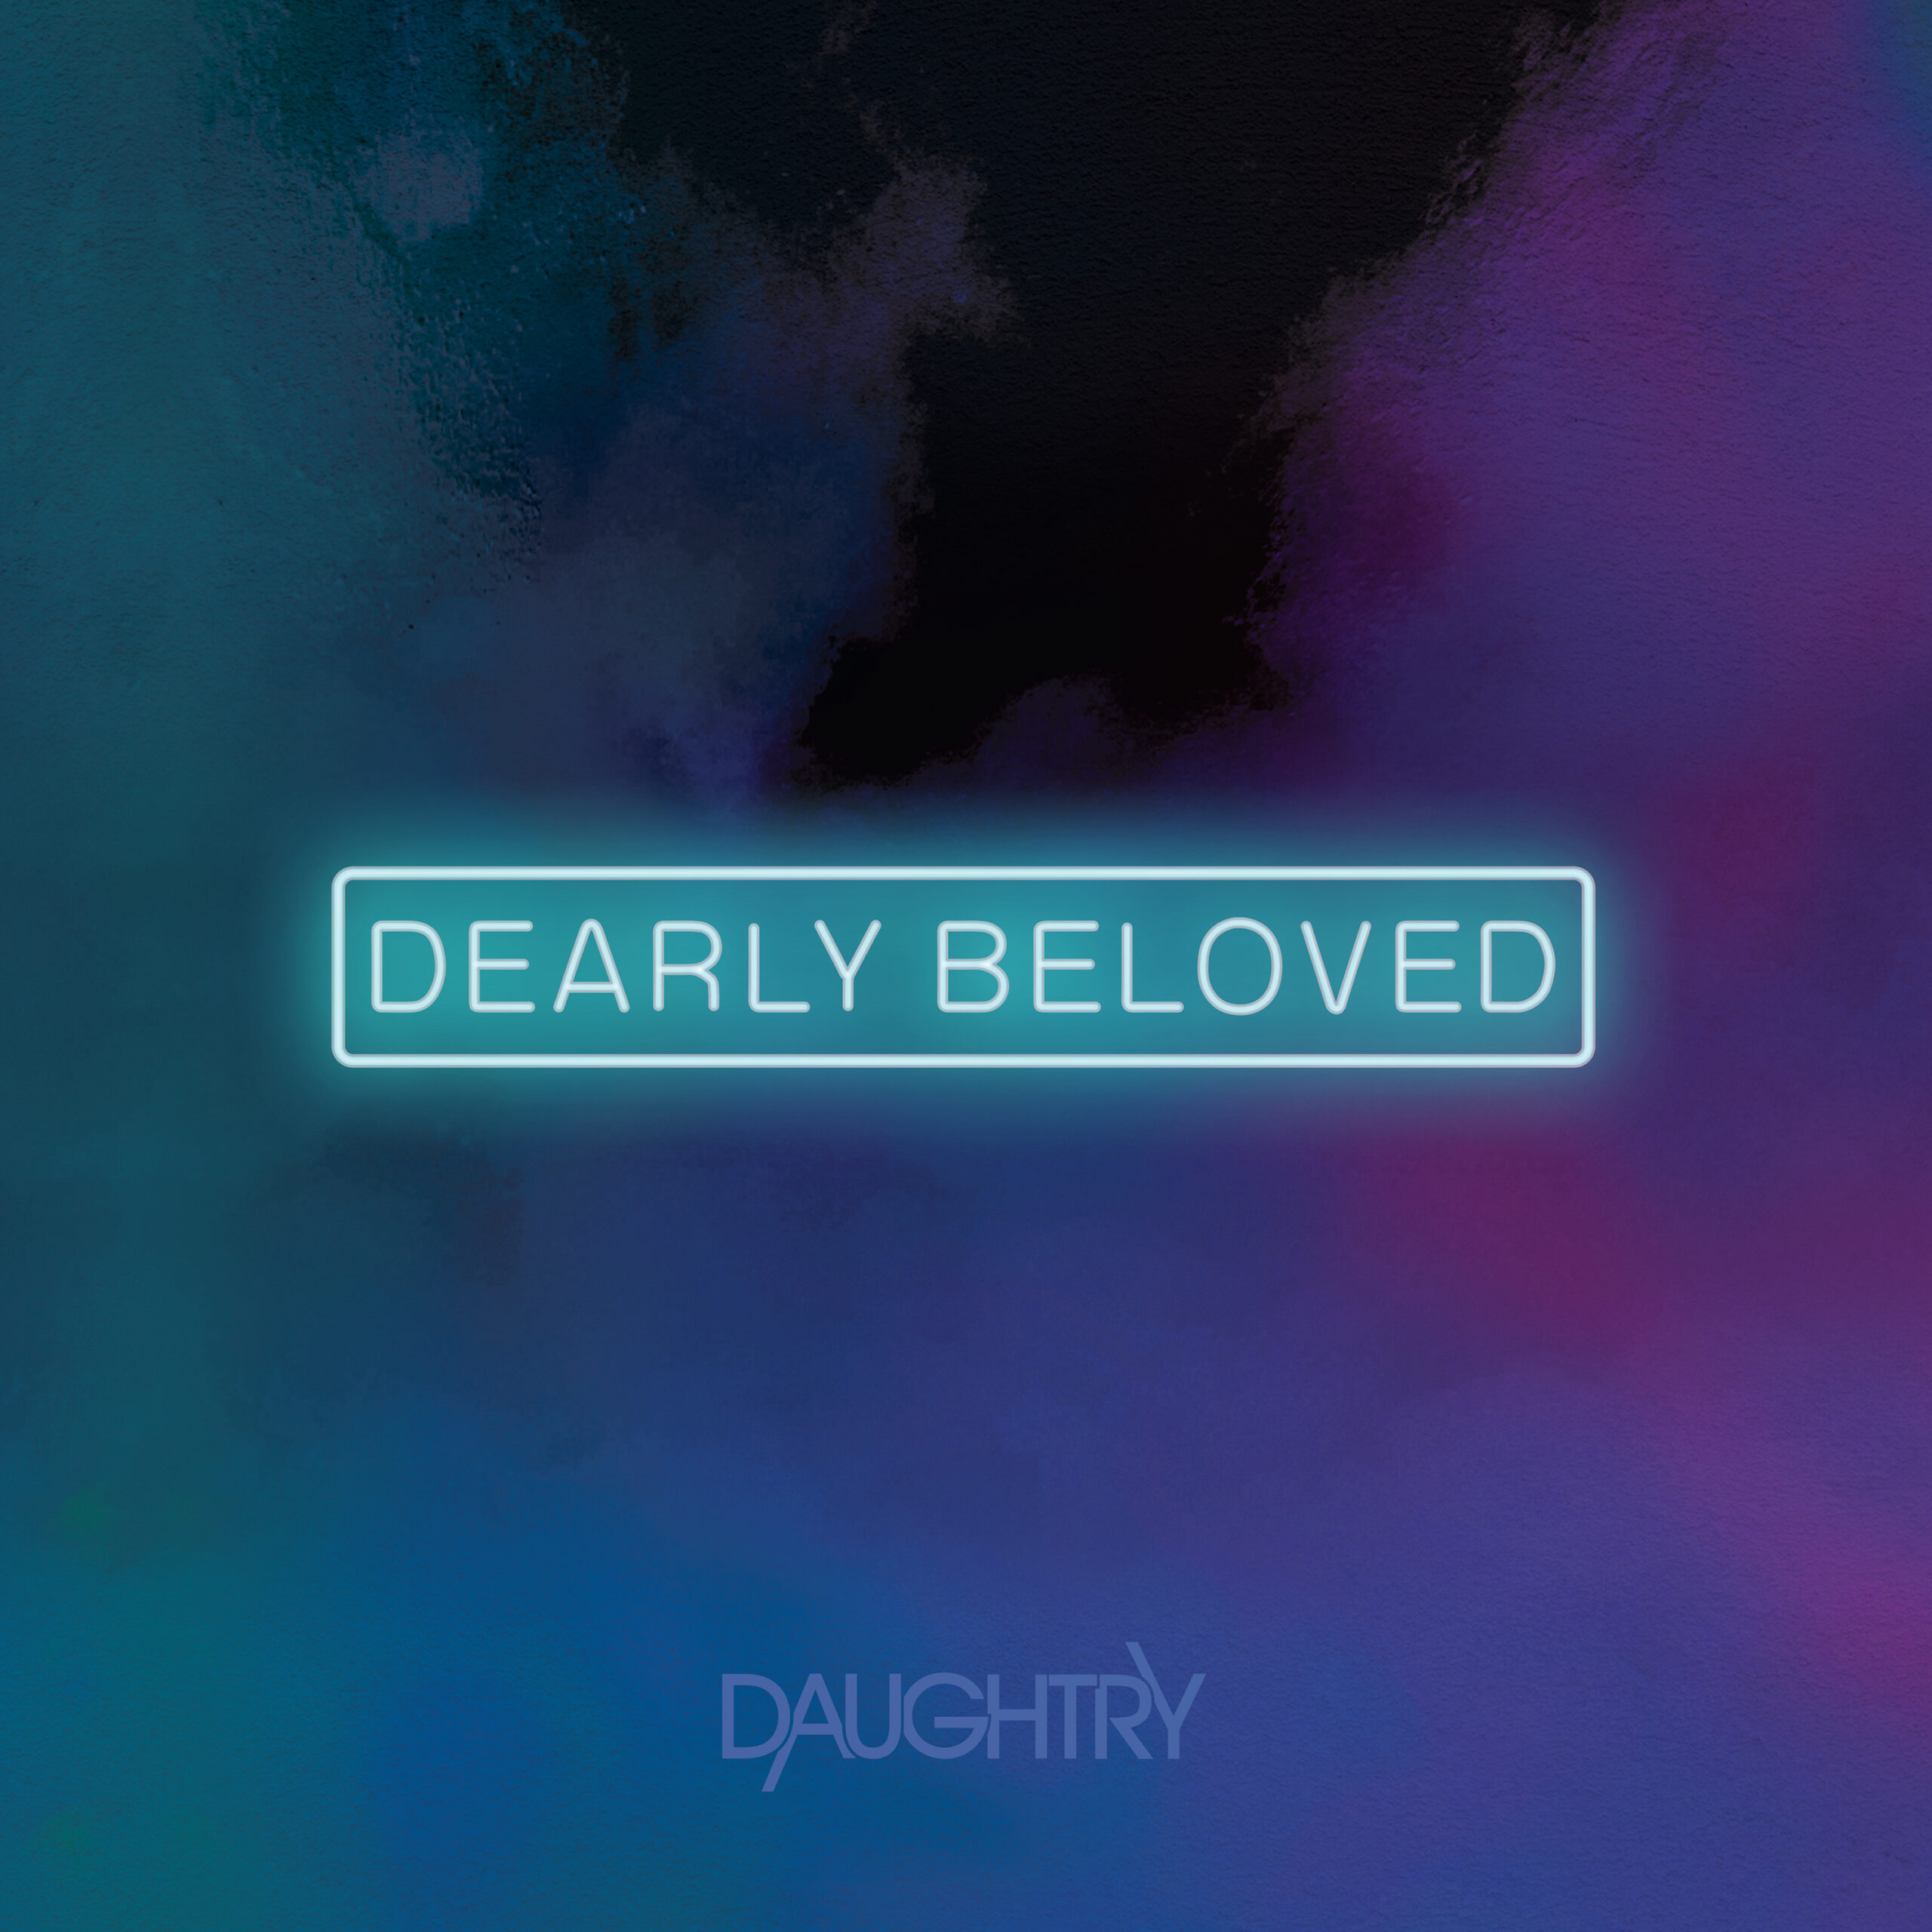 Daughtry To Release New Album, Dearly Beloved